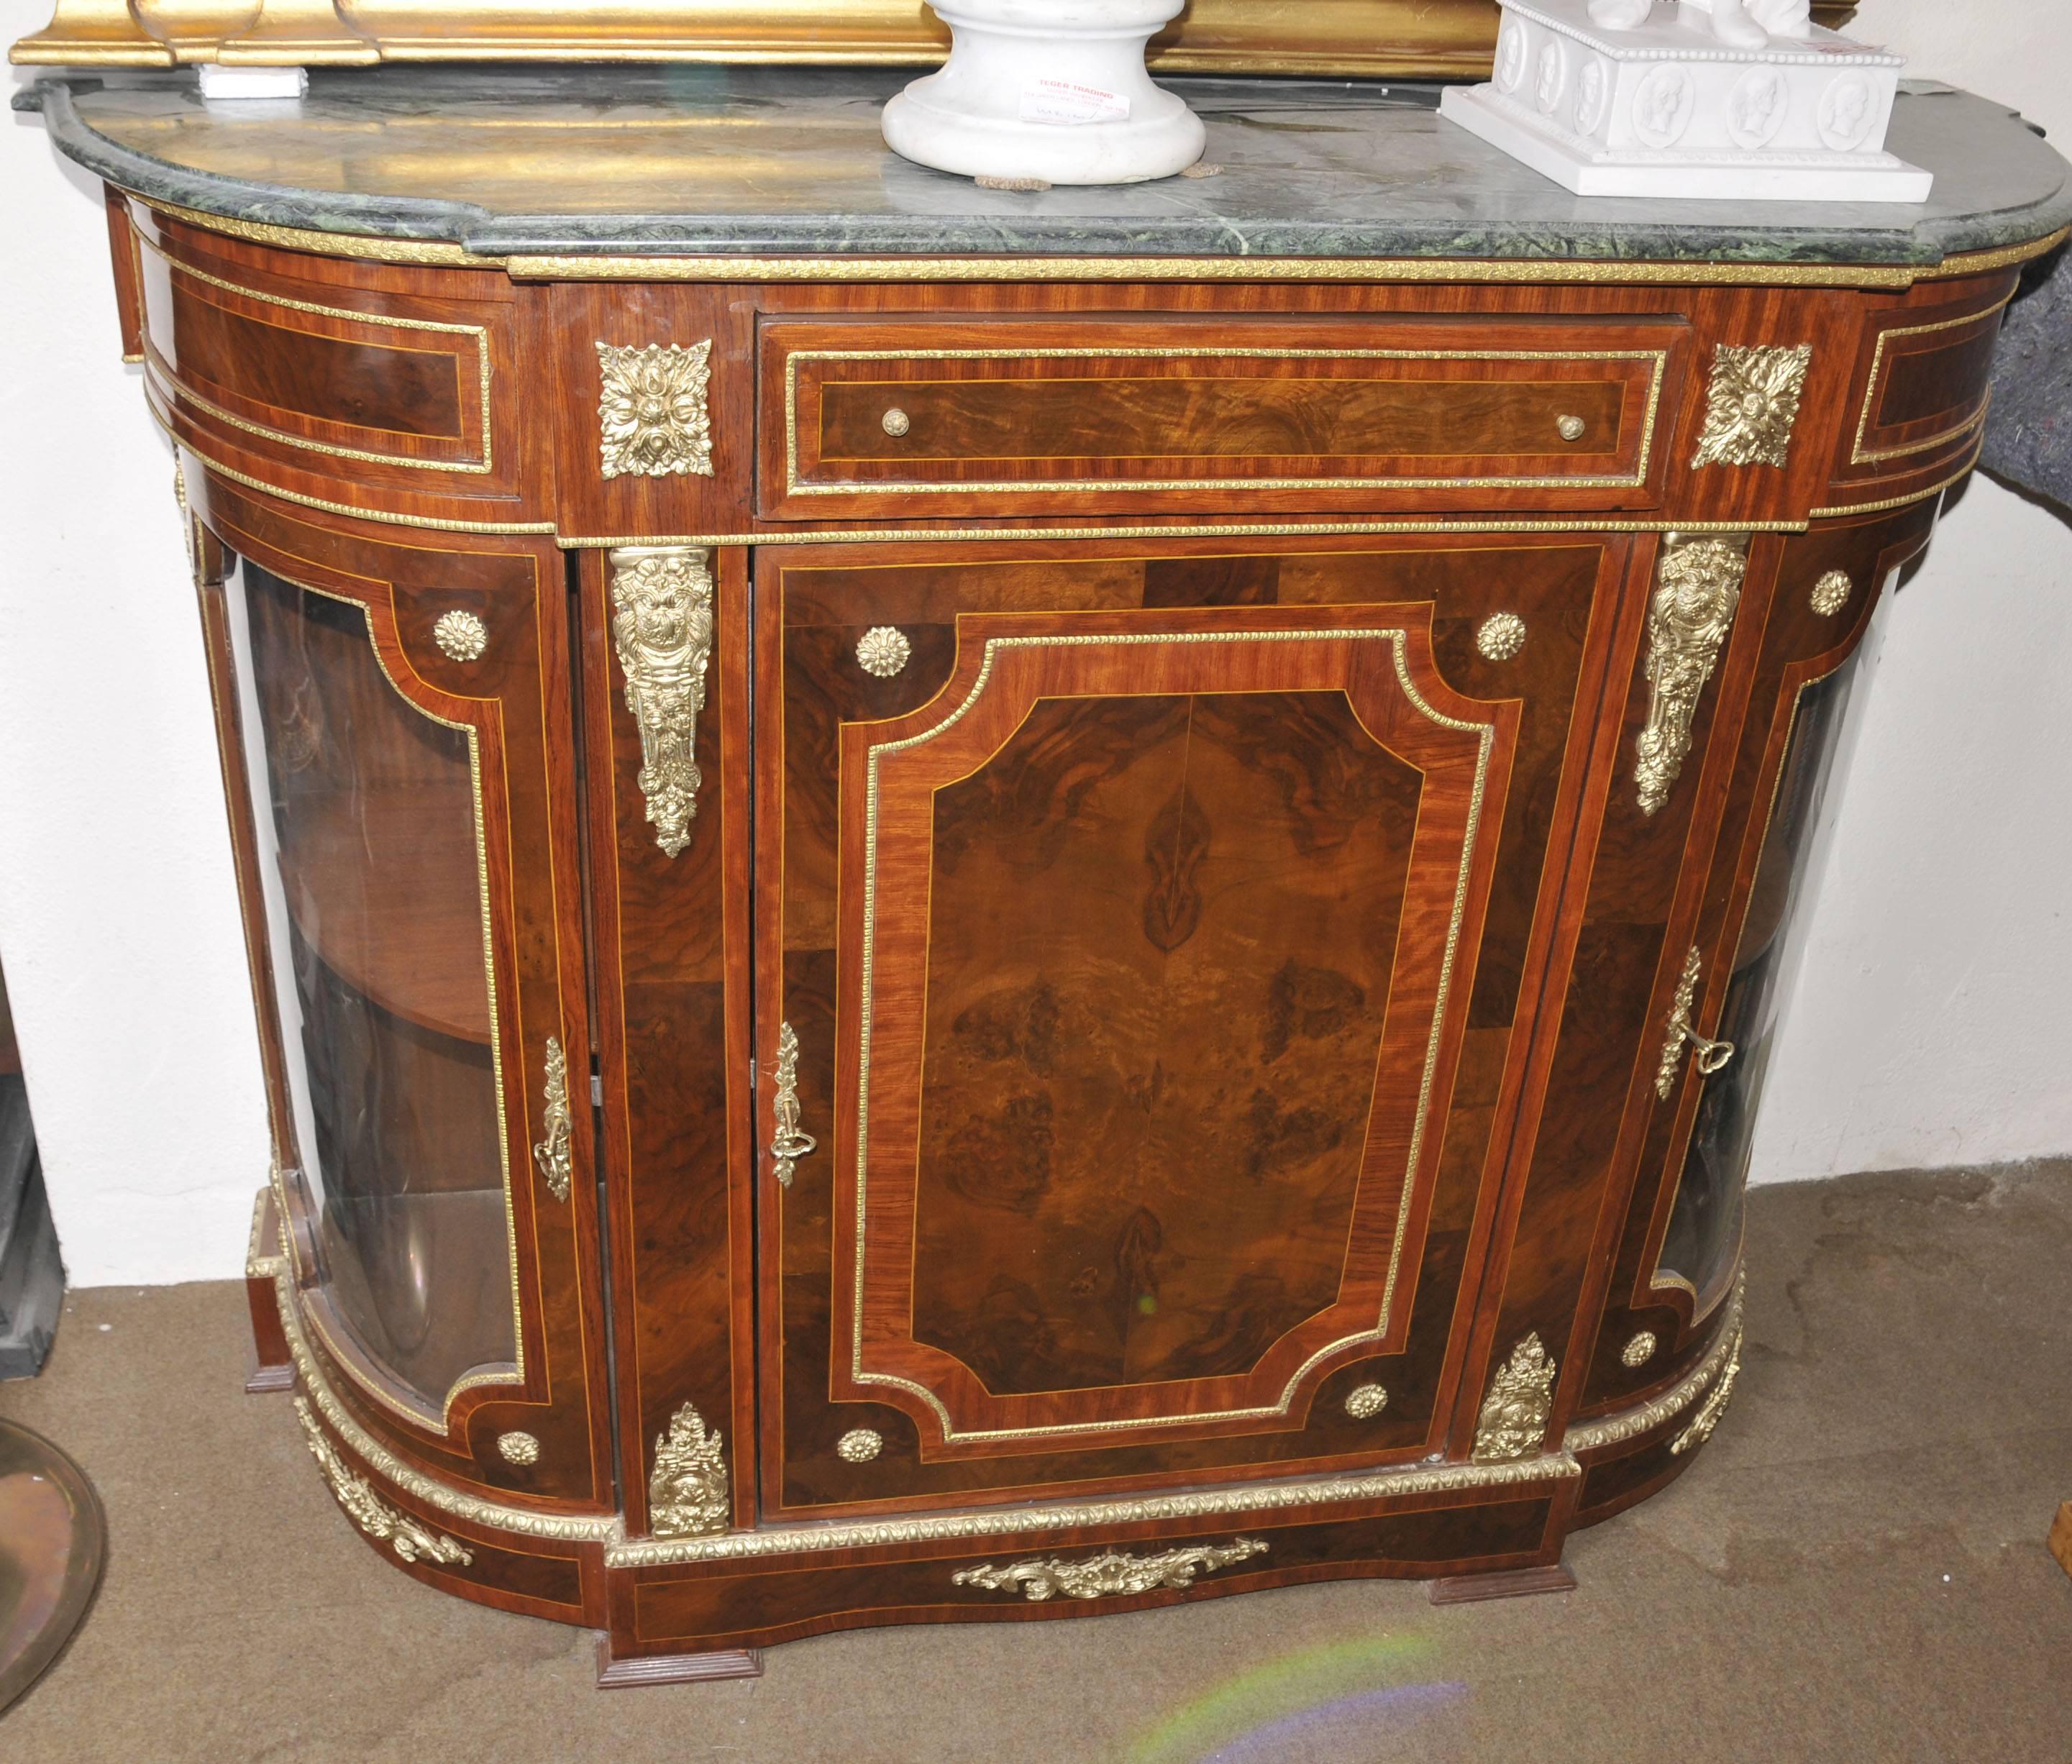 Stunning French Empire sideboard or cabinet in kingwood.
Elegant piece with lots of internal storage and glass fronted sides.
Ormolu fixtures are well cast and very bright.
Bought from a dealer at Les Puces flea market in Paris.
Offered in great